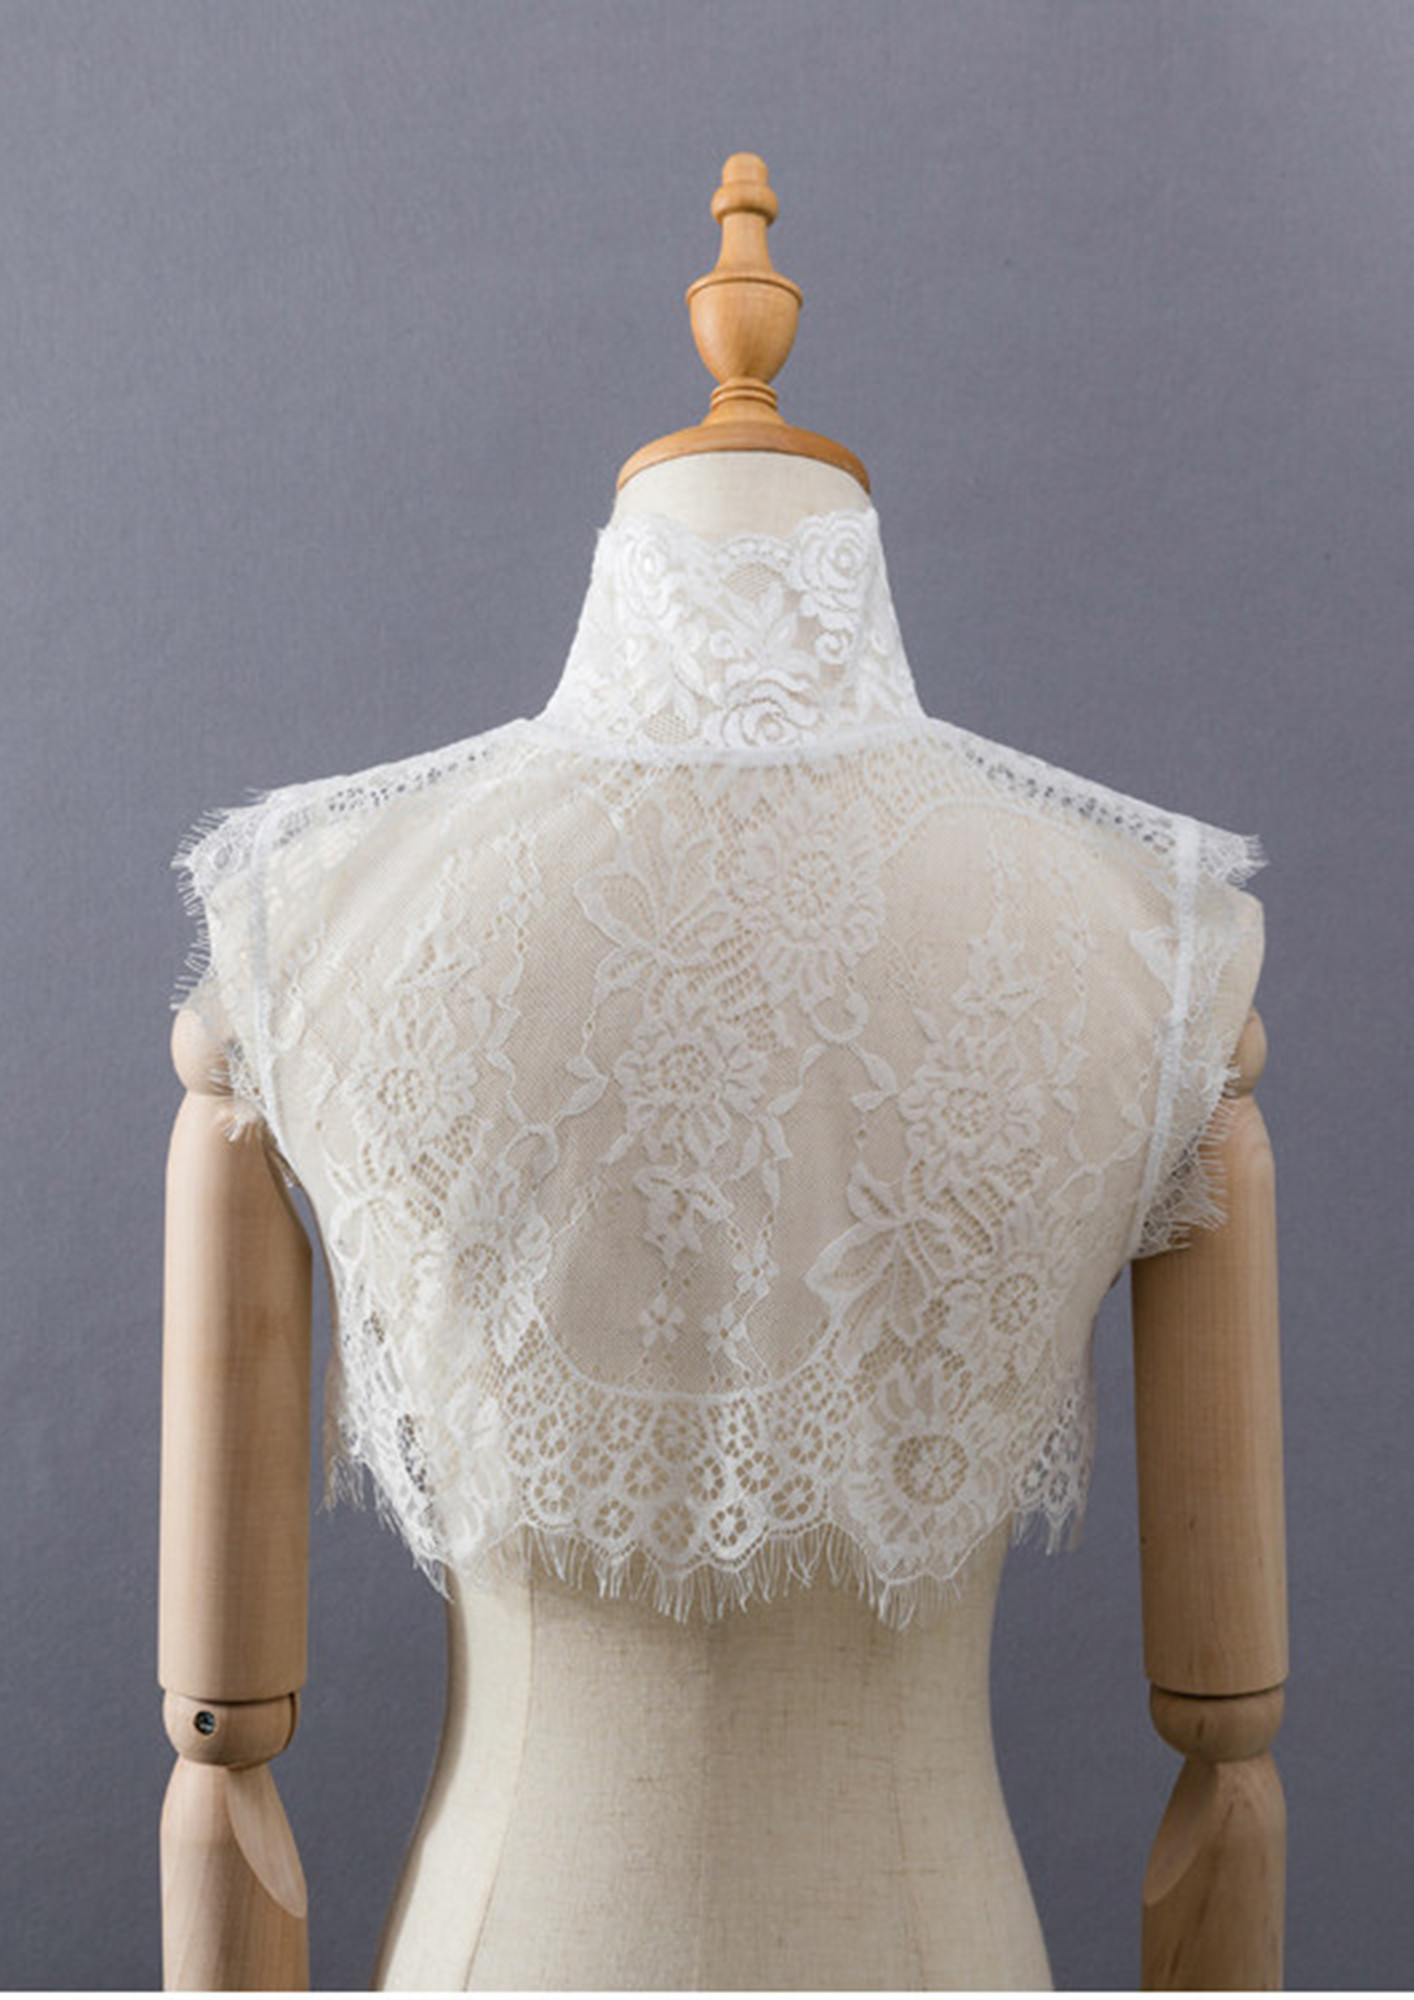 A LACE-DETAIL CUTE STAND-UP WHITE COLLAR